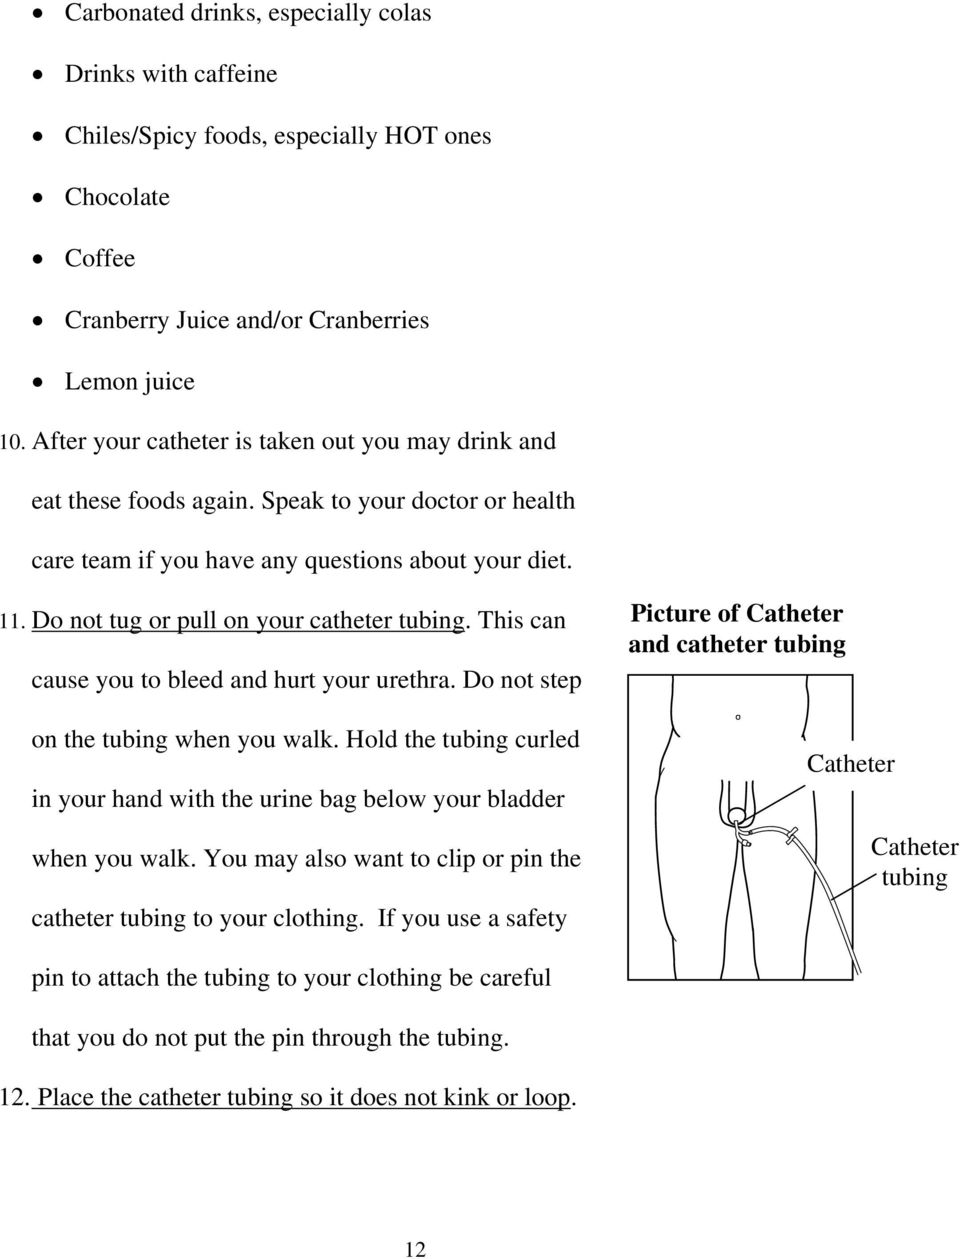 Do not tug or pull on your catheter tubing. This can cause you to bleed and hurt your urethra. Do not step on the tubing when you walk.